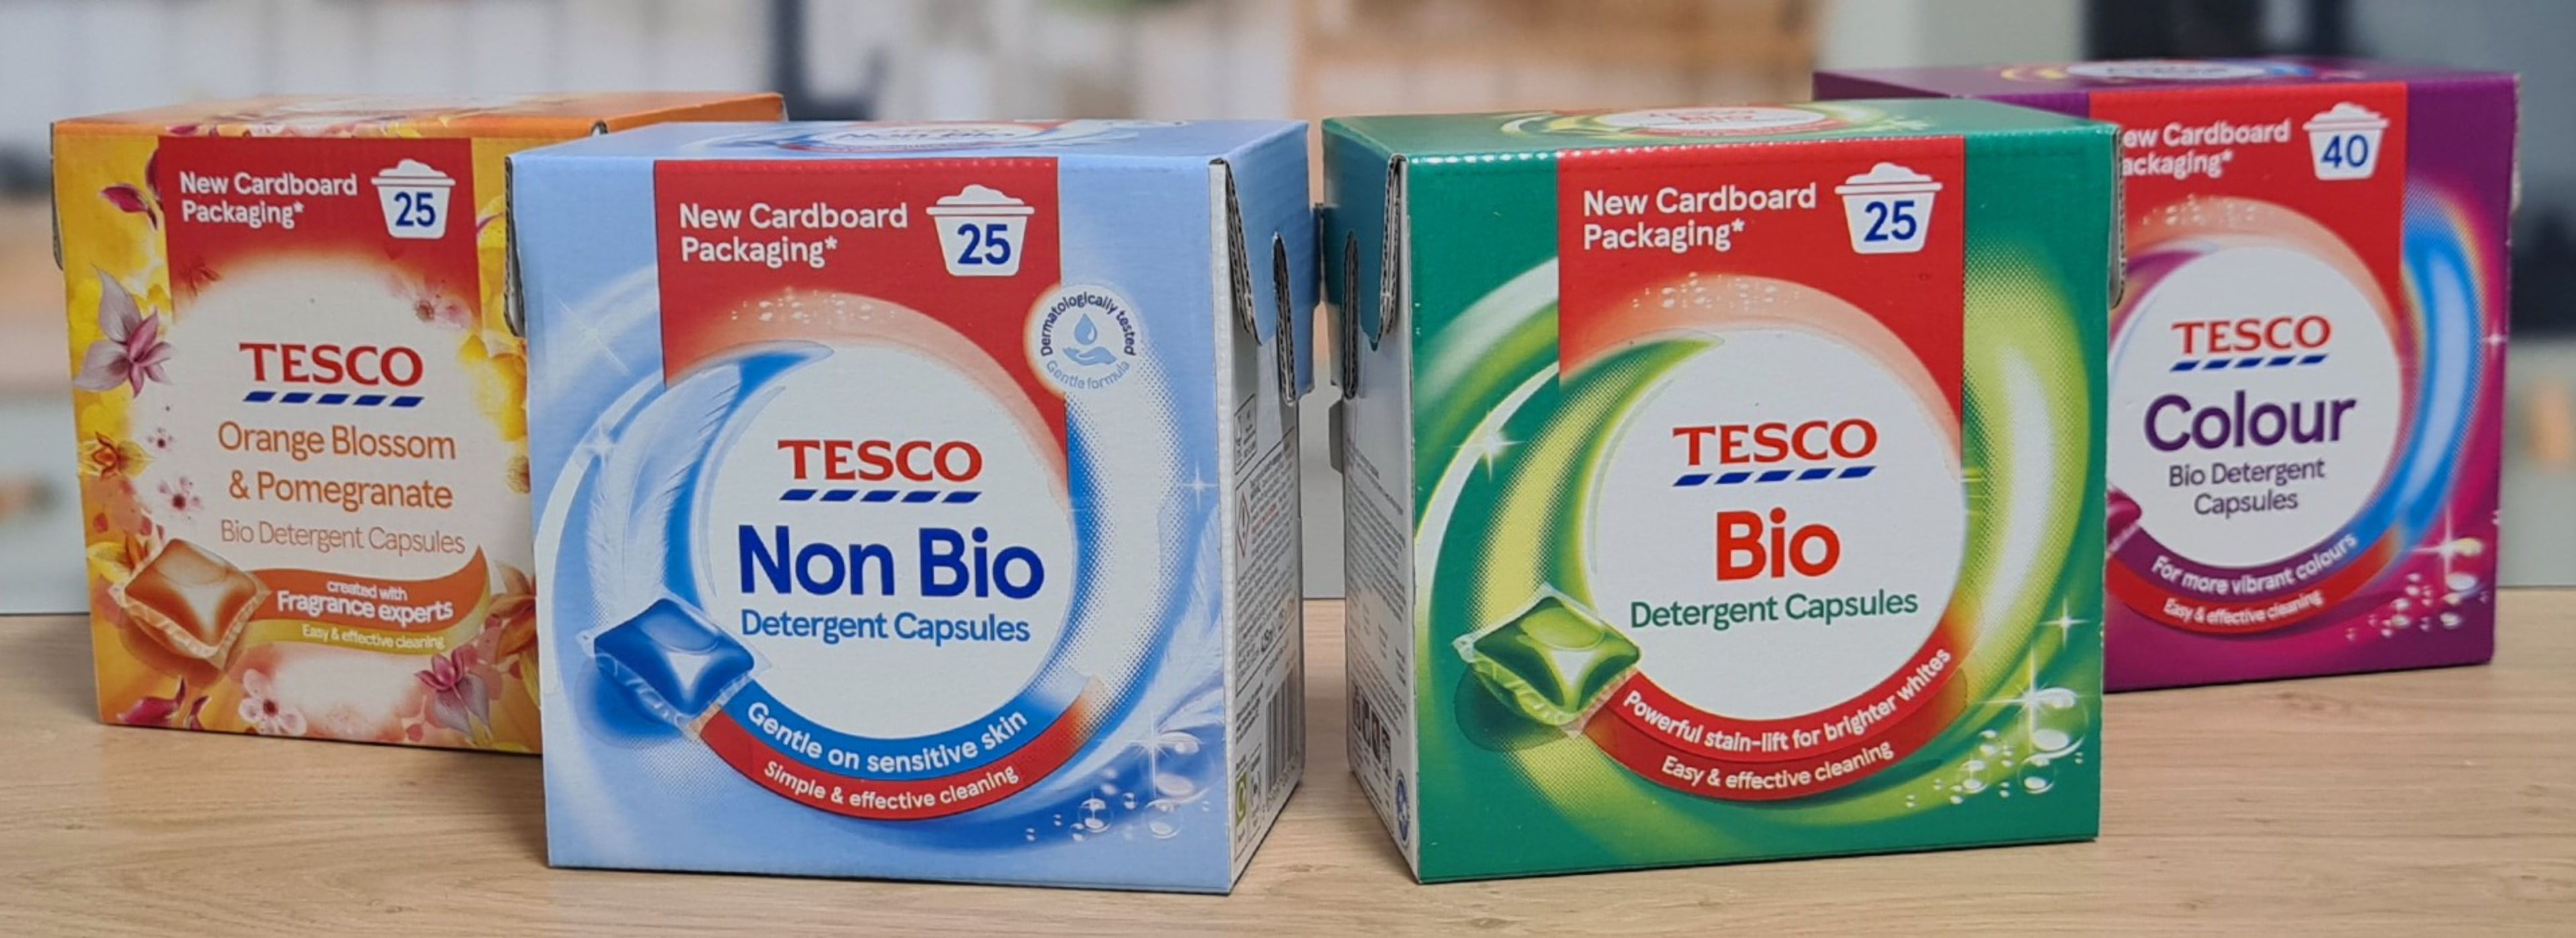 Tesco switches to recyclable cardboard packaging for laundry detergent pods